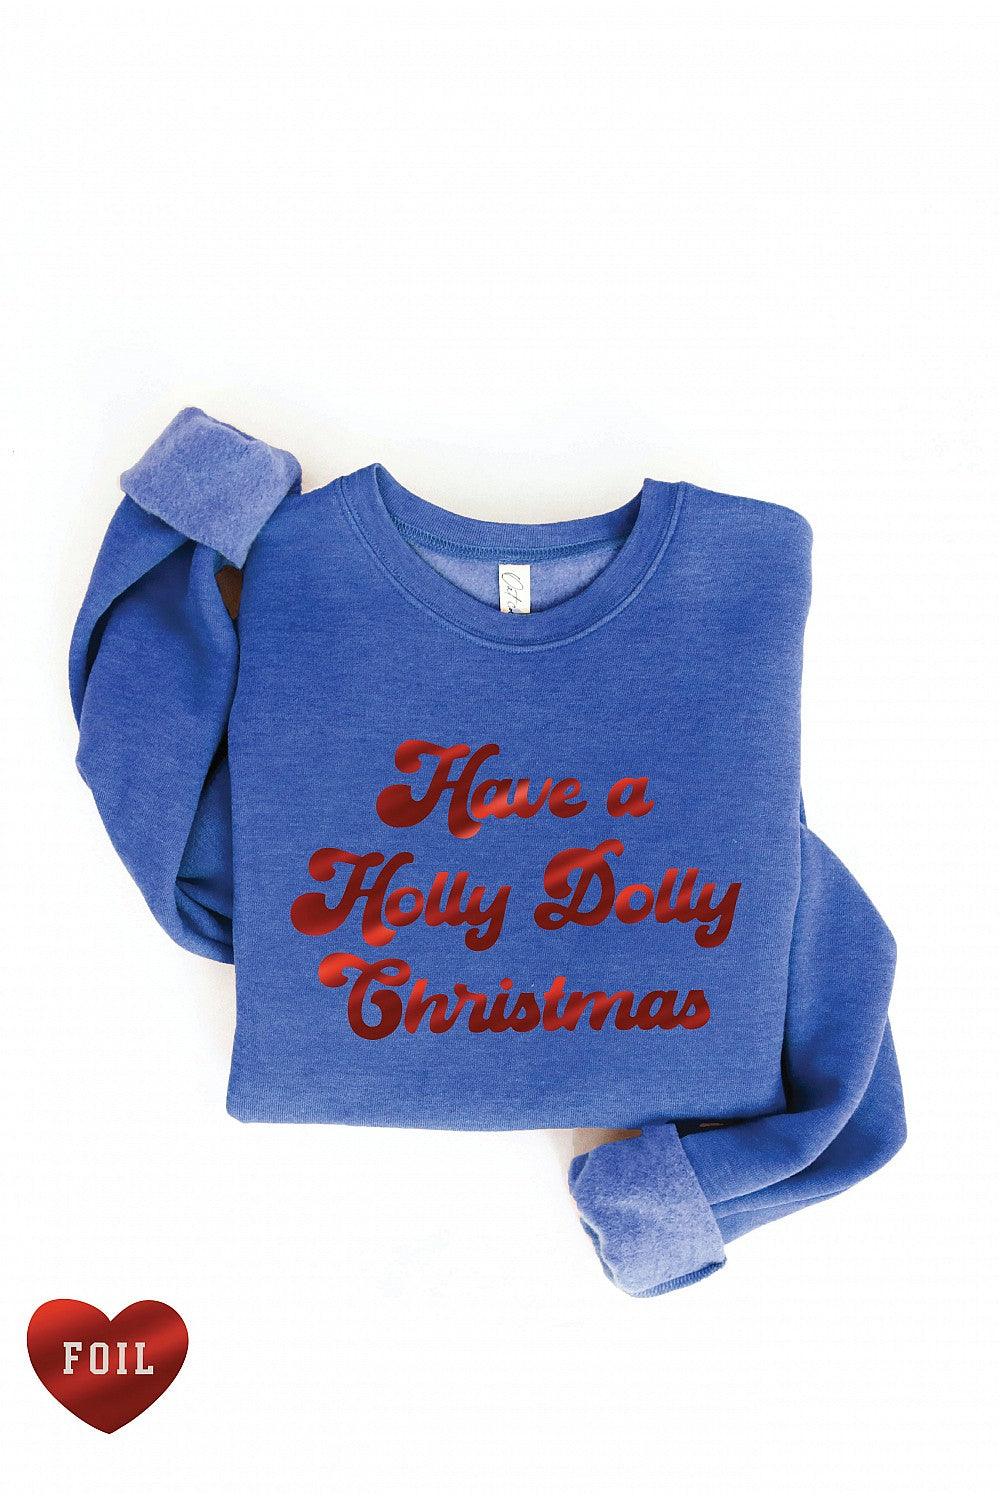 HAVE A HOLLY DOLLY CHRISTMAS PULLOVER , graphic pulllover , It's NOMB , christmas graphics, COZY GRAPHIC PULLOVER, COZY GRAPHIC SWEATSHIRT, graphic sweatshirt, HAVE A HOLLY DOLLY CHRISTMAS SWEATSHIRT, SWEATSHIRTS , It's NOMB , itsnomb.com